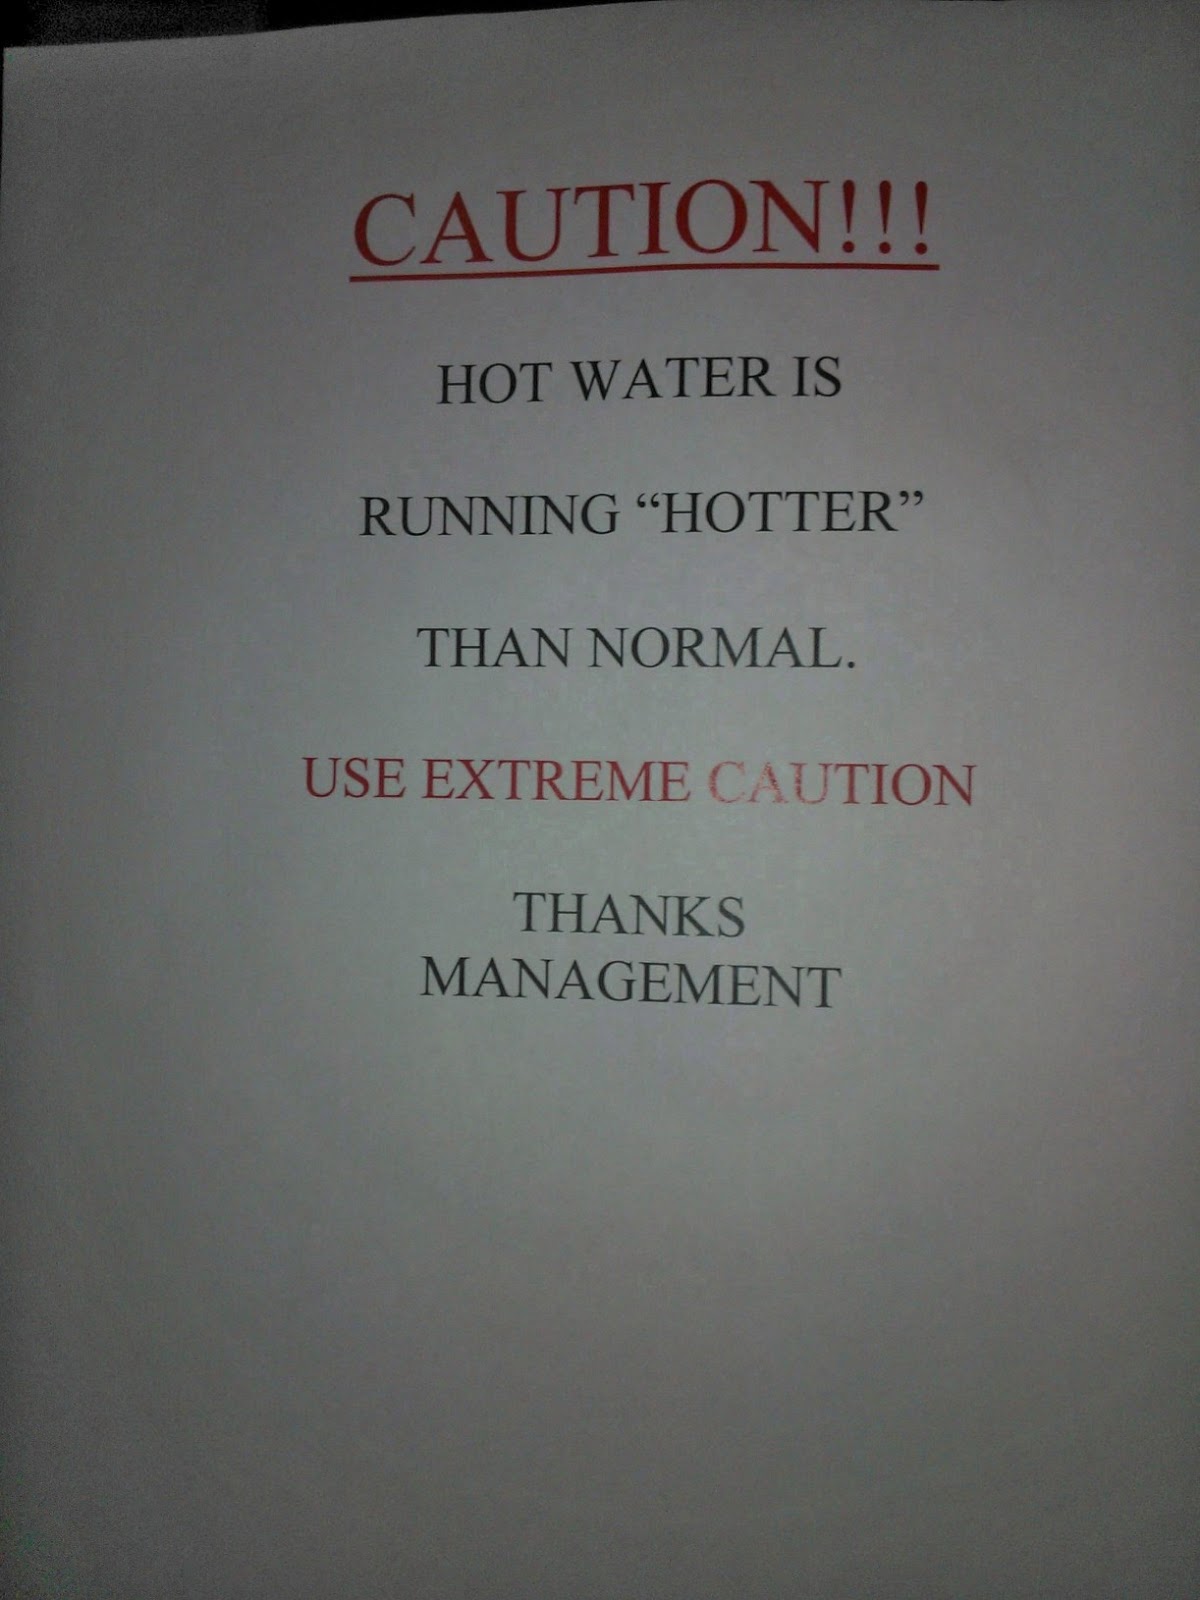 document - Caution!!! Hot Water Is Running Hotter Than Normal. Use Extreme Caution Thanks Management